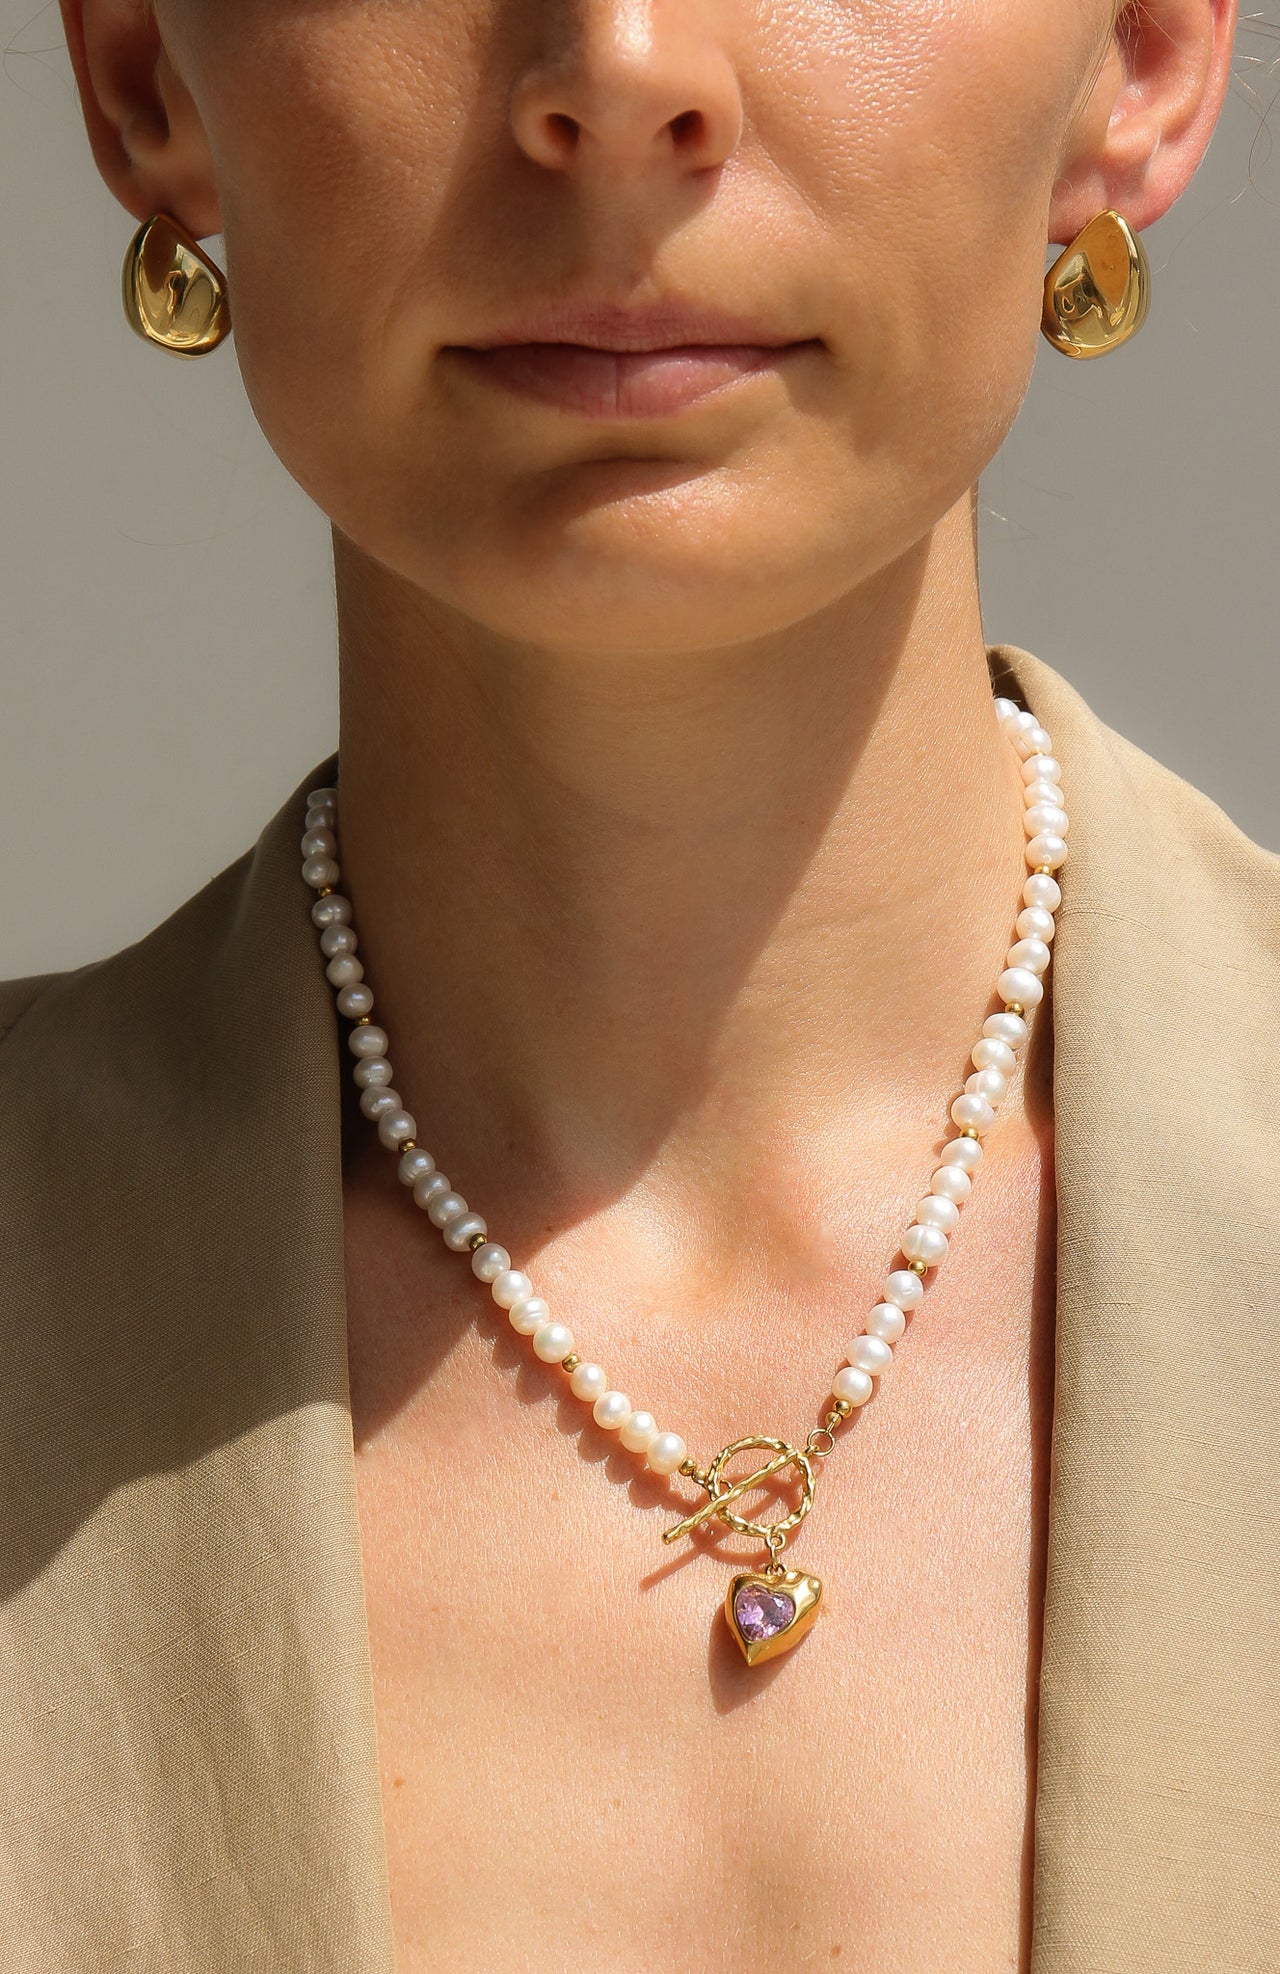 GOLD HEART FRESH WATER PEARL NECKLACE PINK STONE